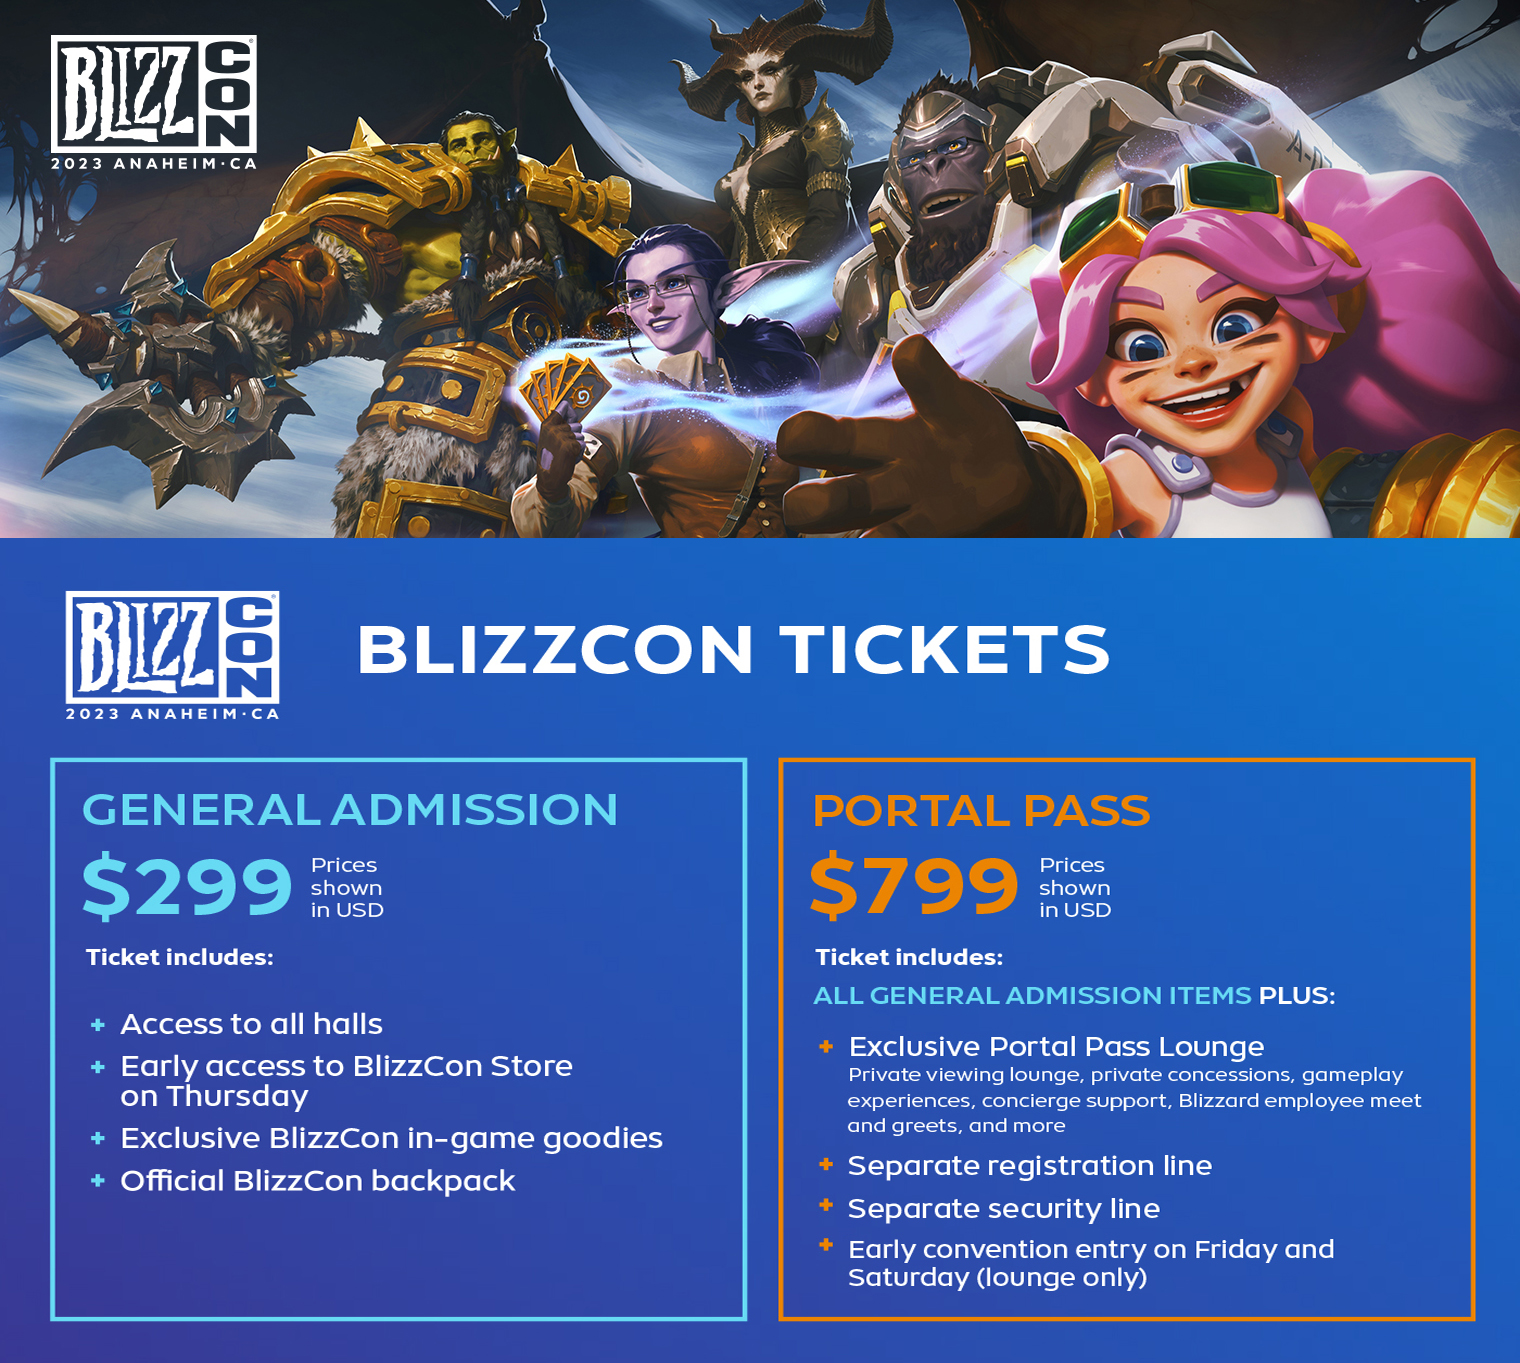 Naeri X 나에리 on Twitter "BLIZZCON 2023 TICKETS ONSALE JULY 8 AND JULY